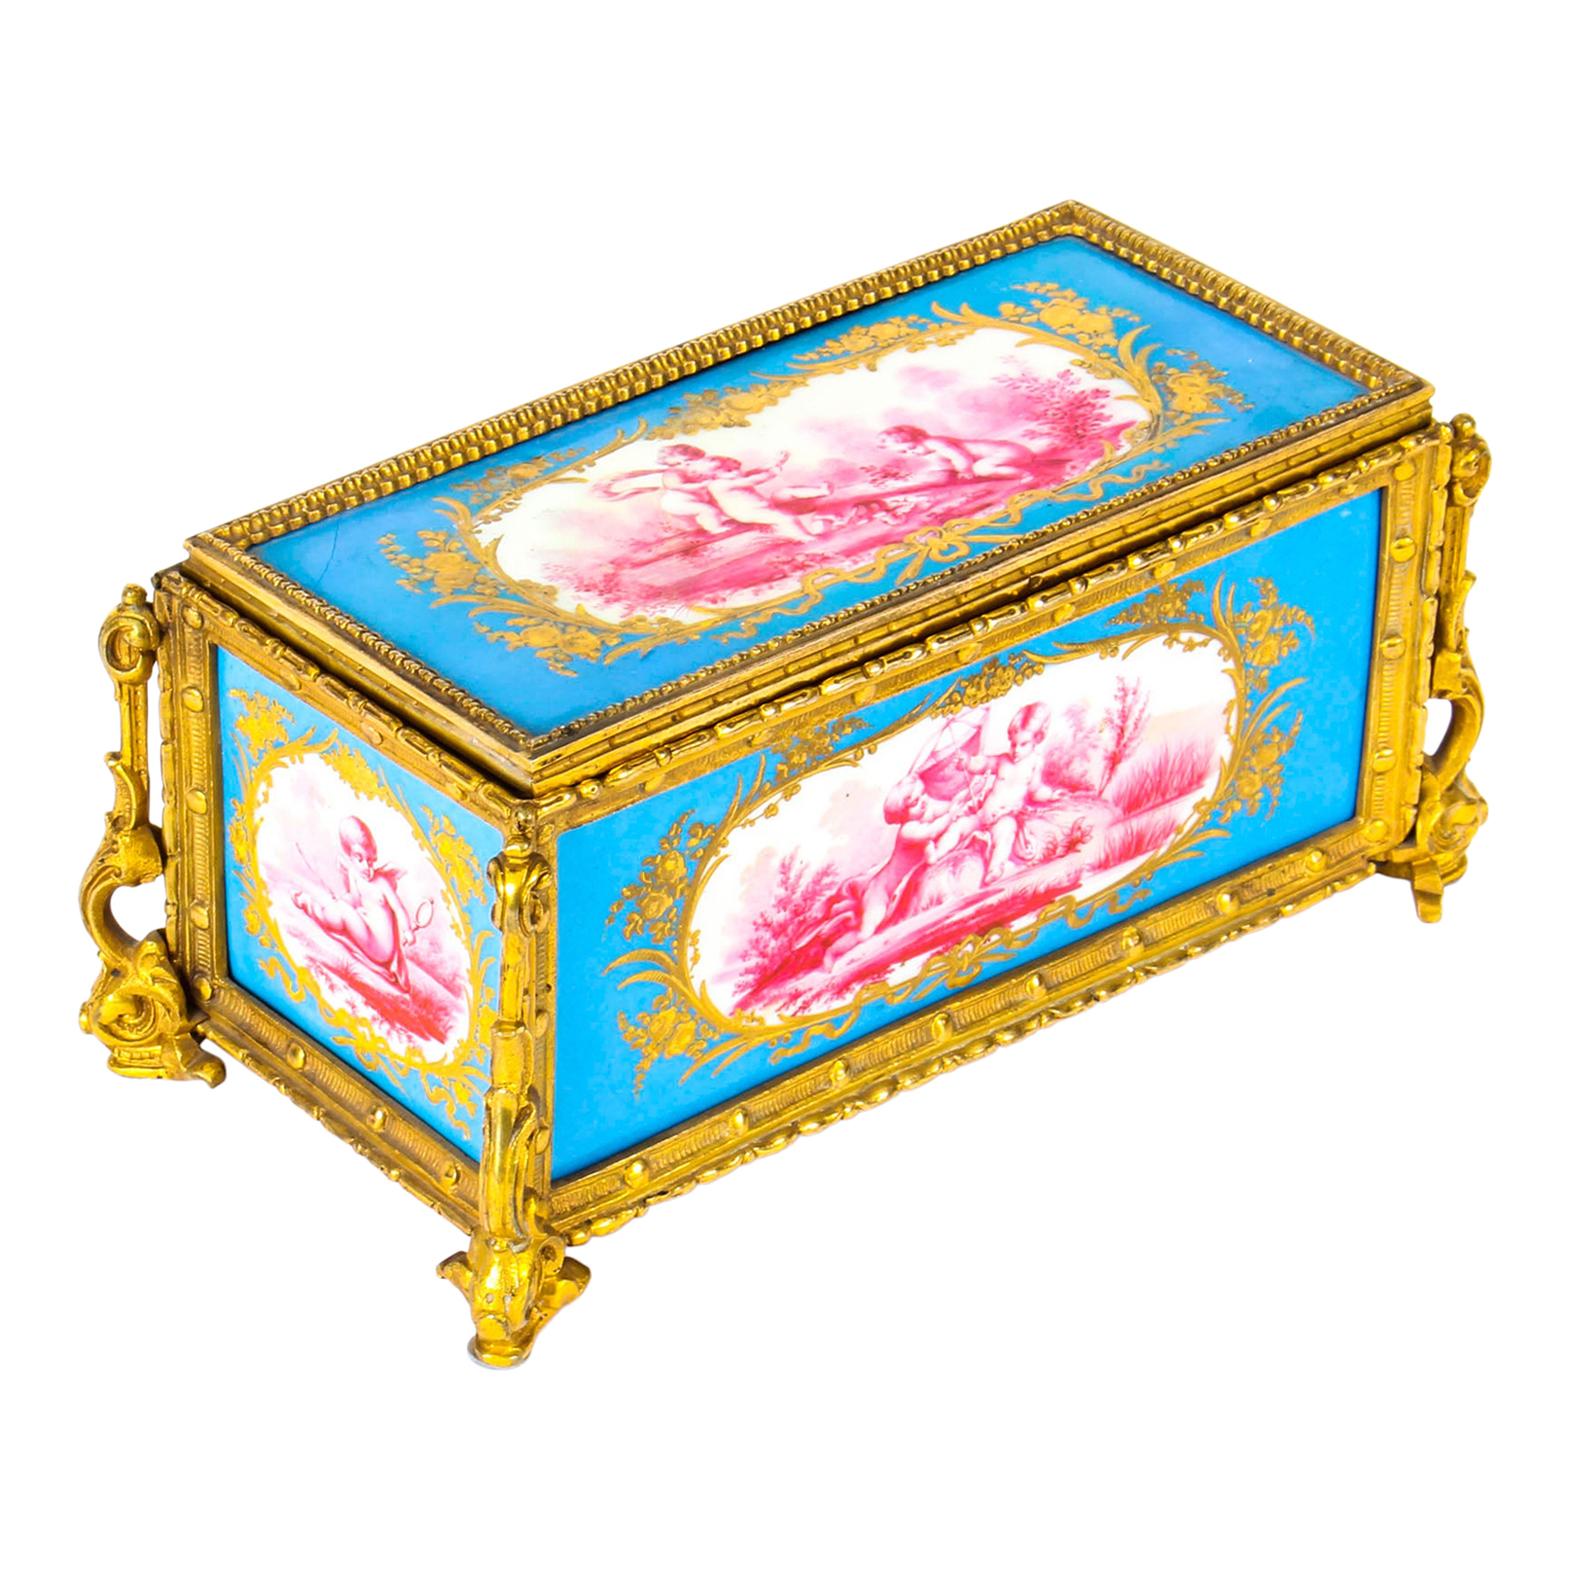 Antique French Sevres Porcelain and Ormolu Jewelry Casket, 19th Century